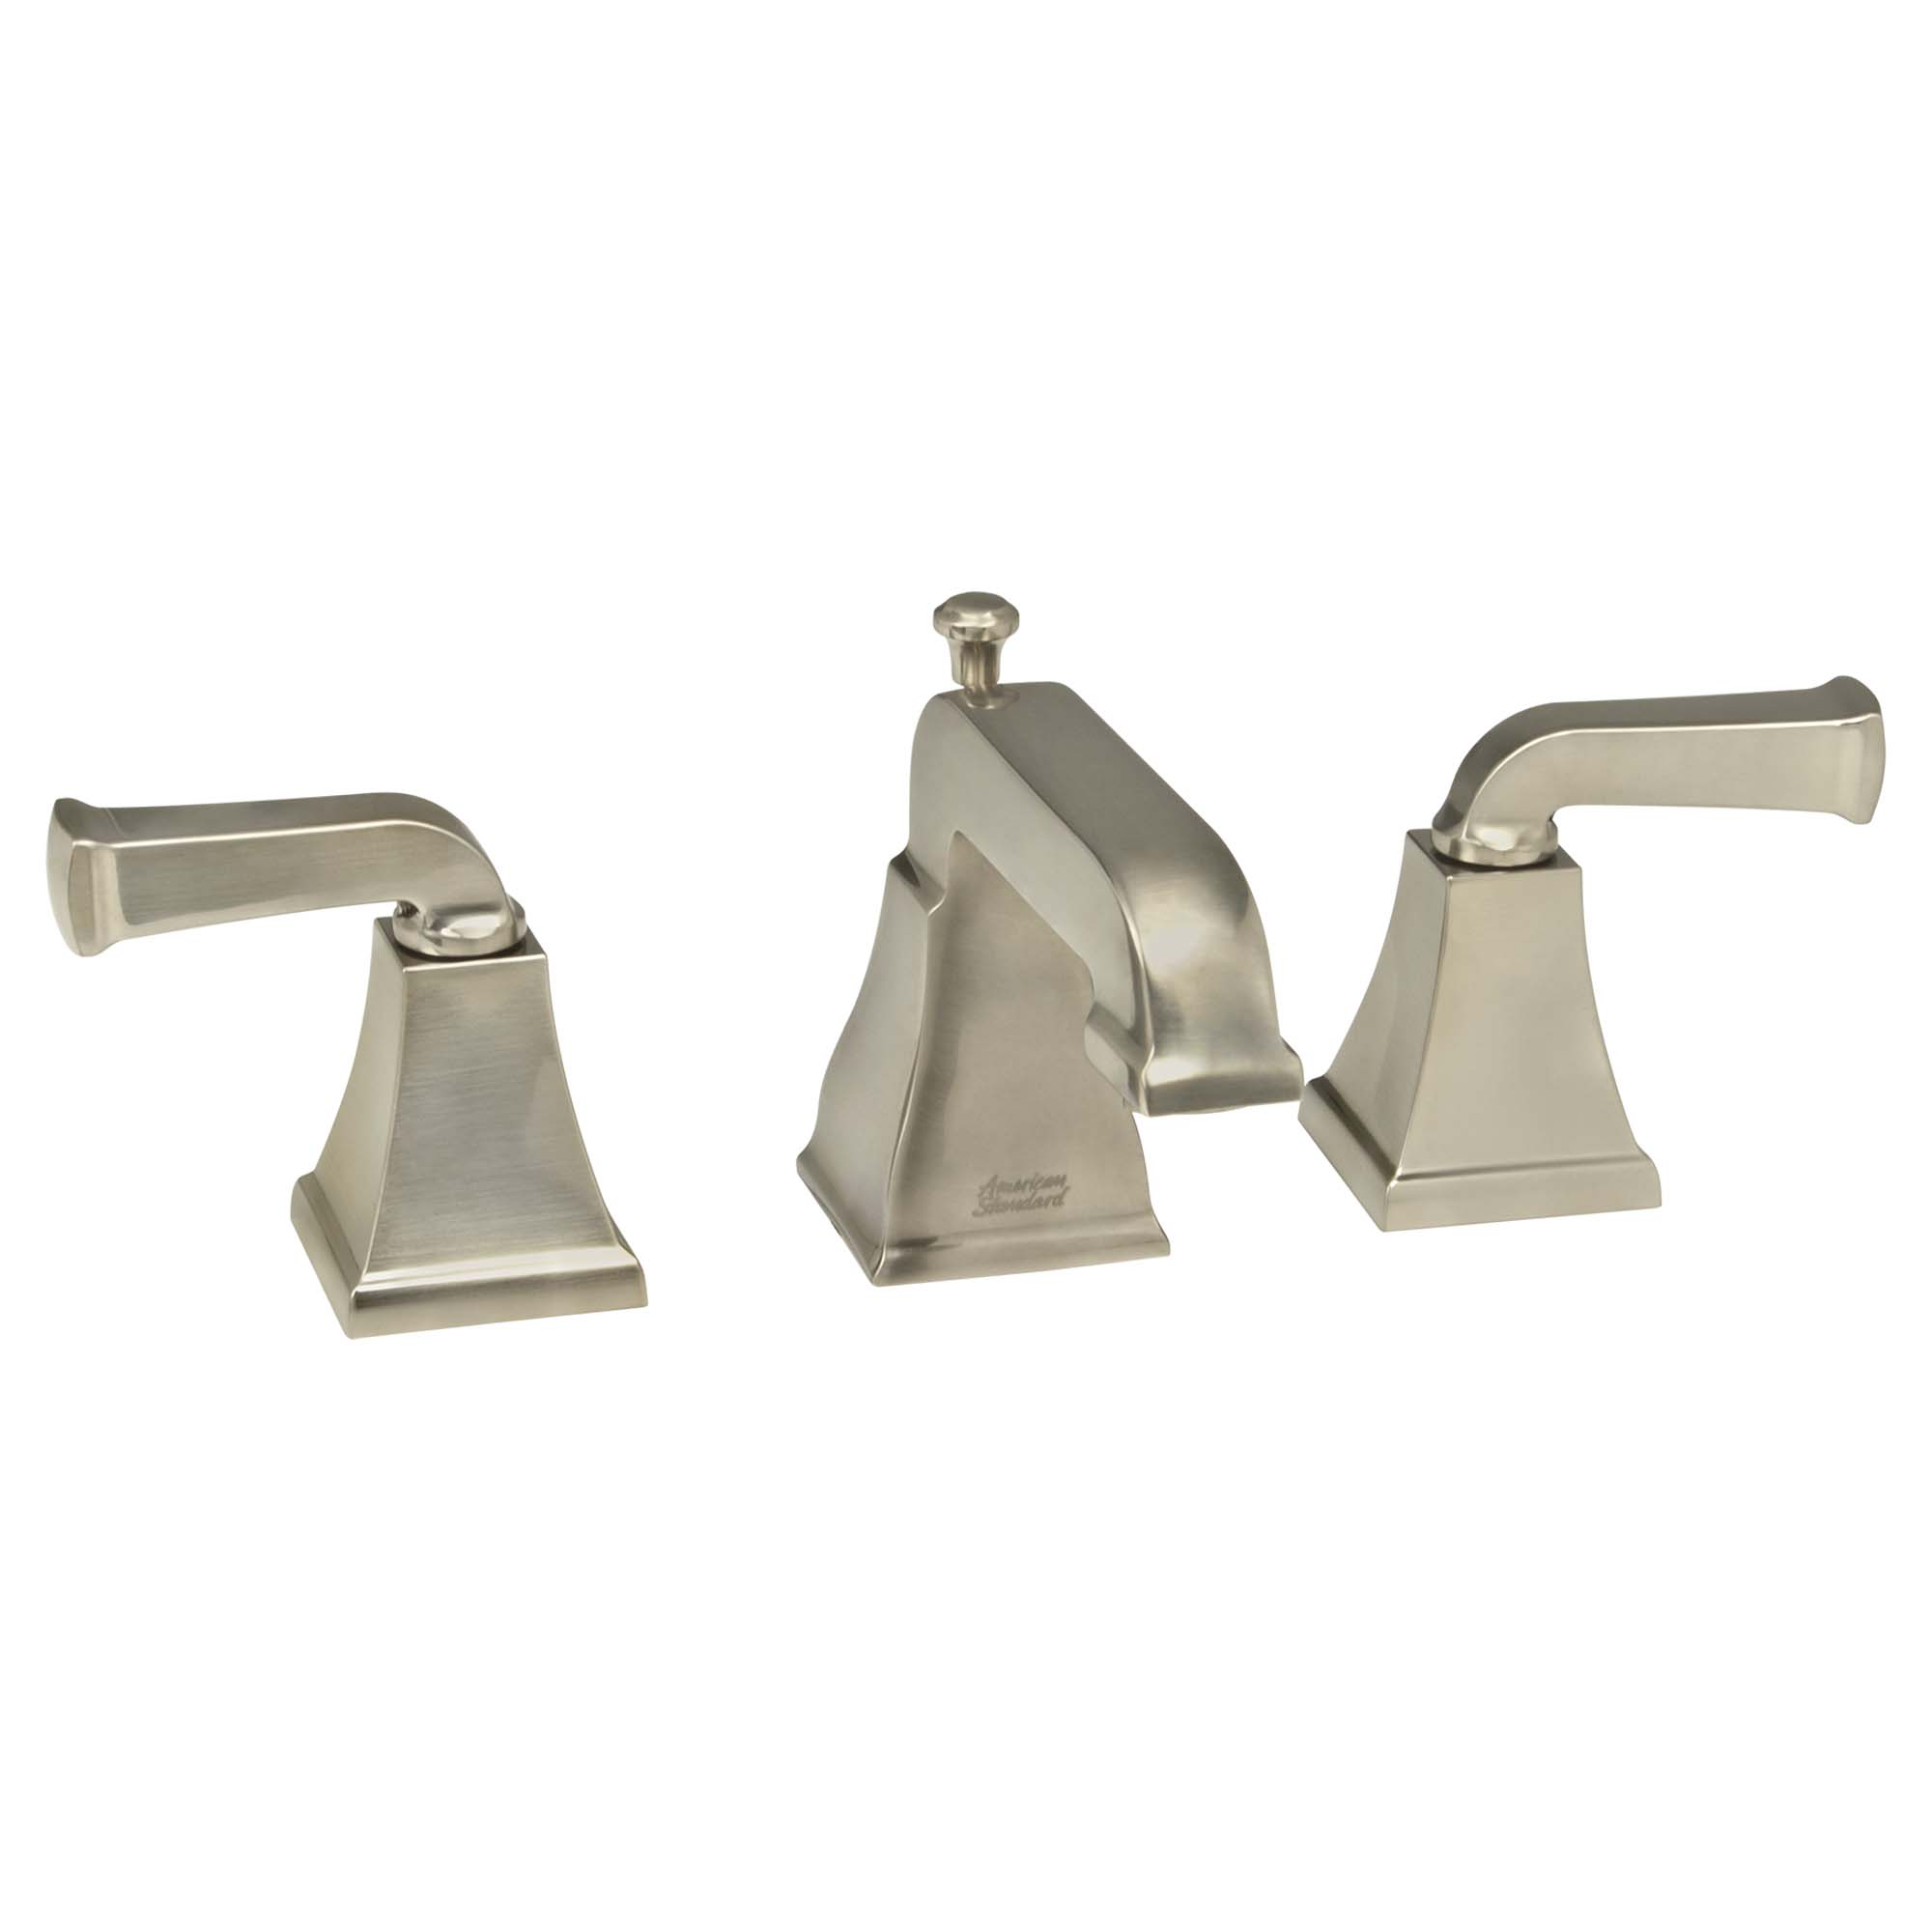 Town Square 2-Handle 8 Inch Widespread Bathroom Faucet